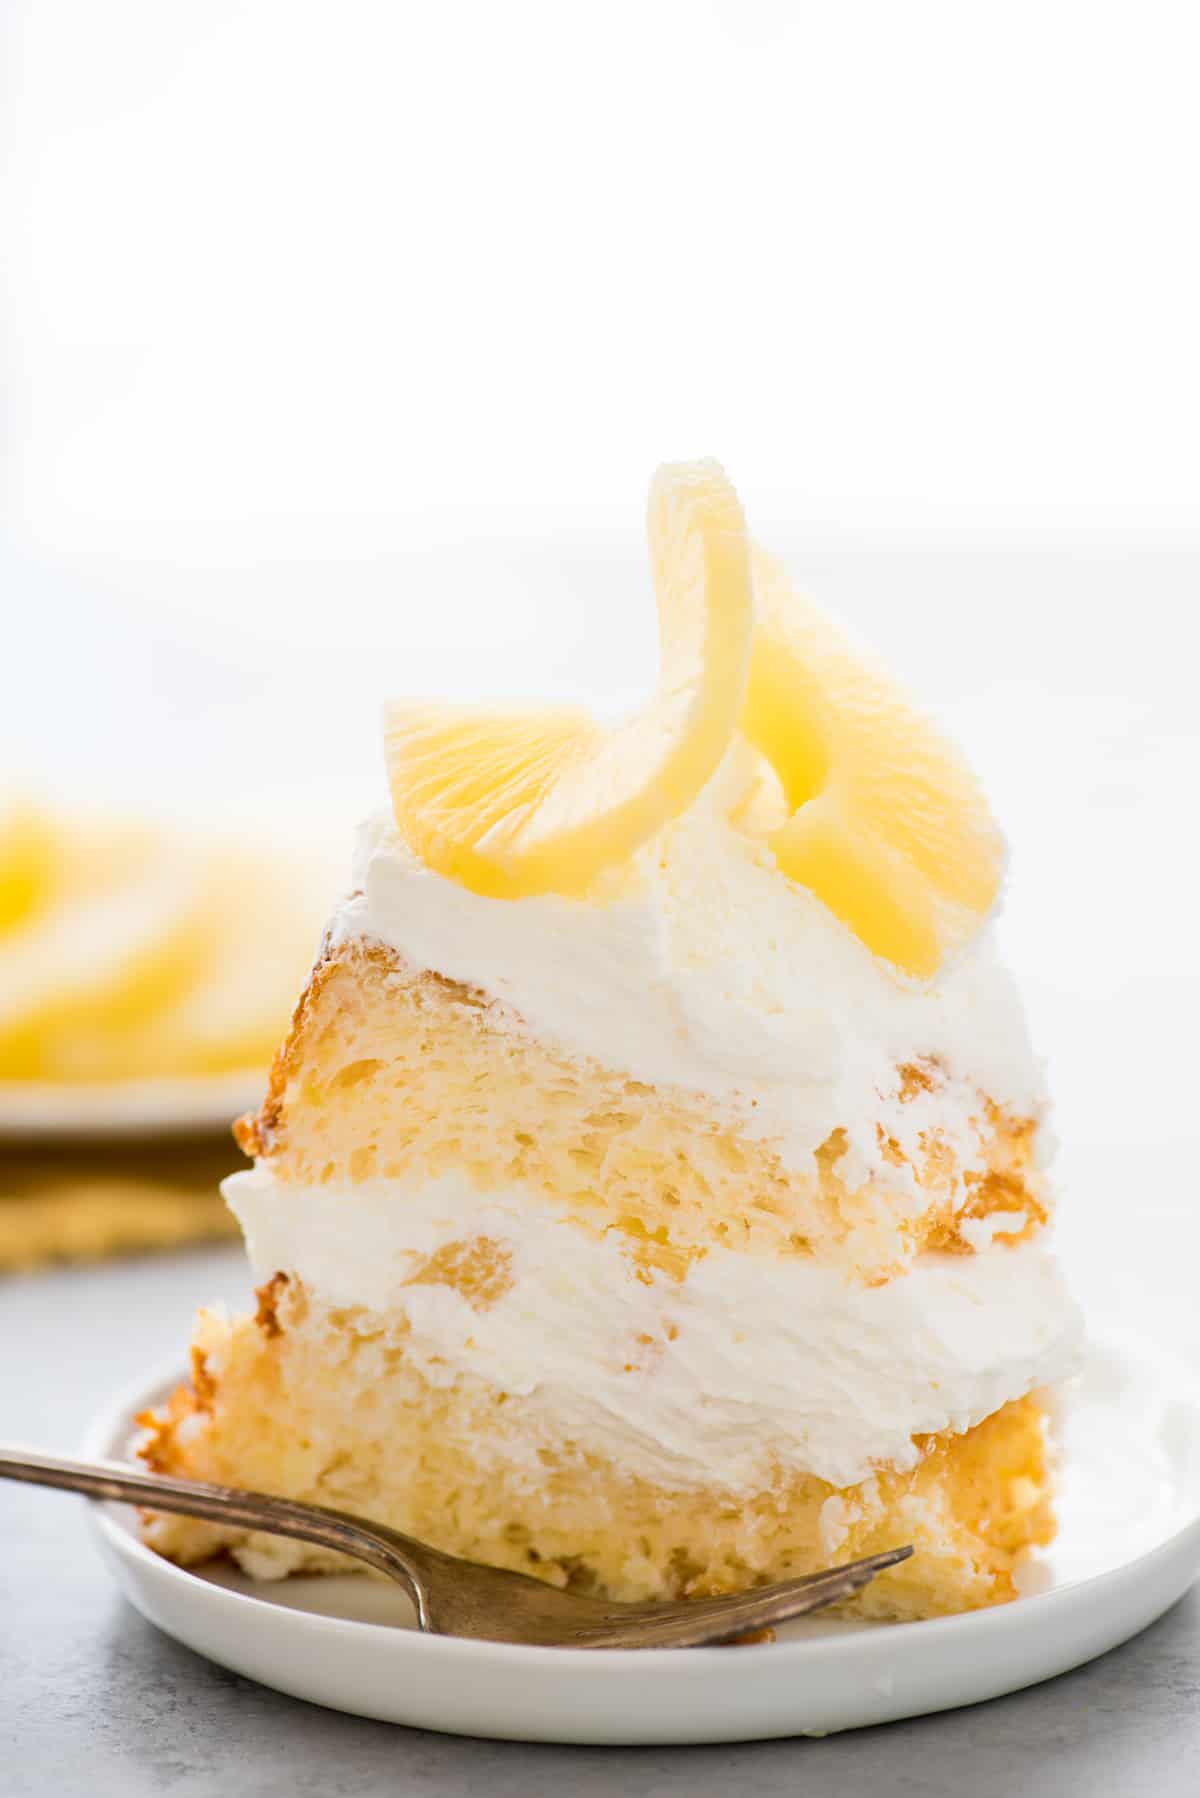 slice of pineapple angel food cake with whipped cream and pineapple on white plate on white background